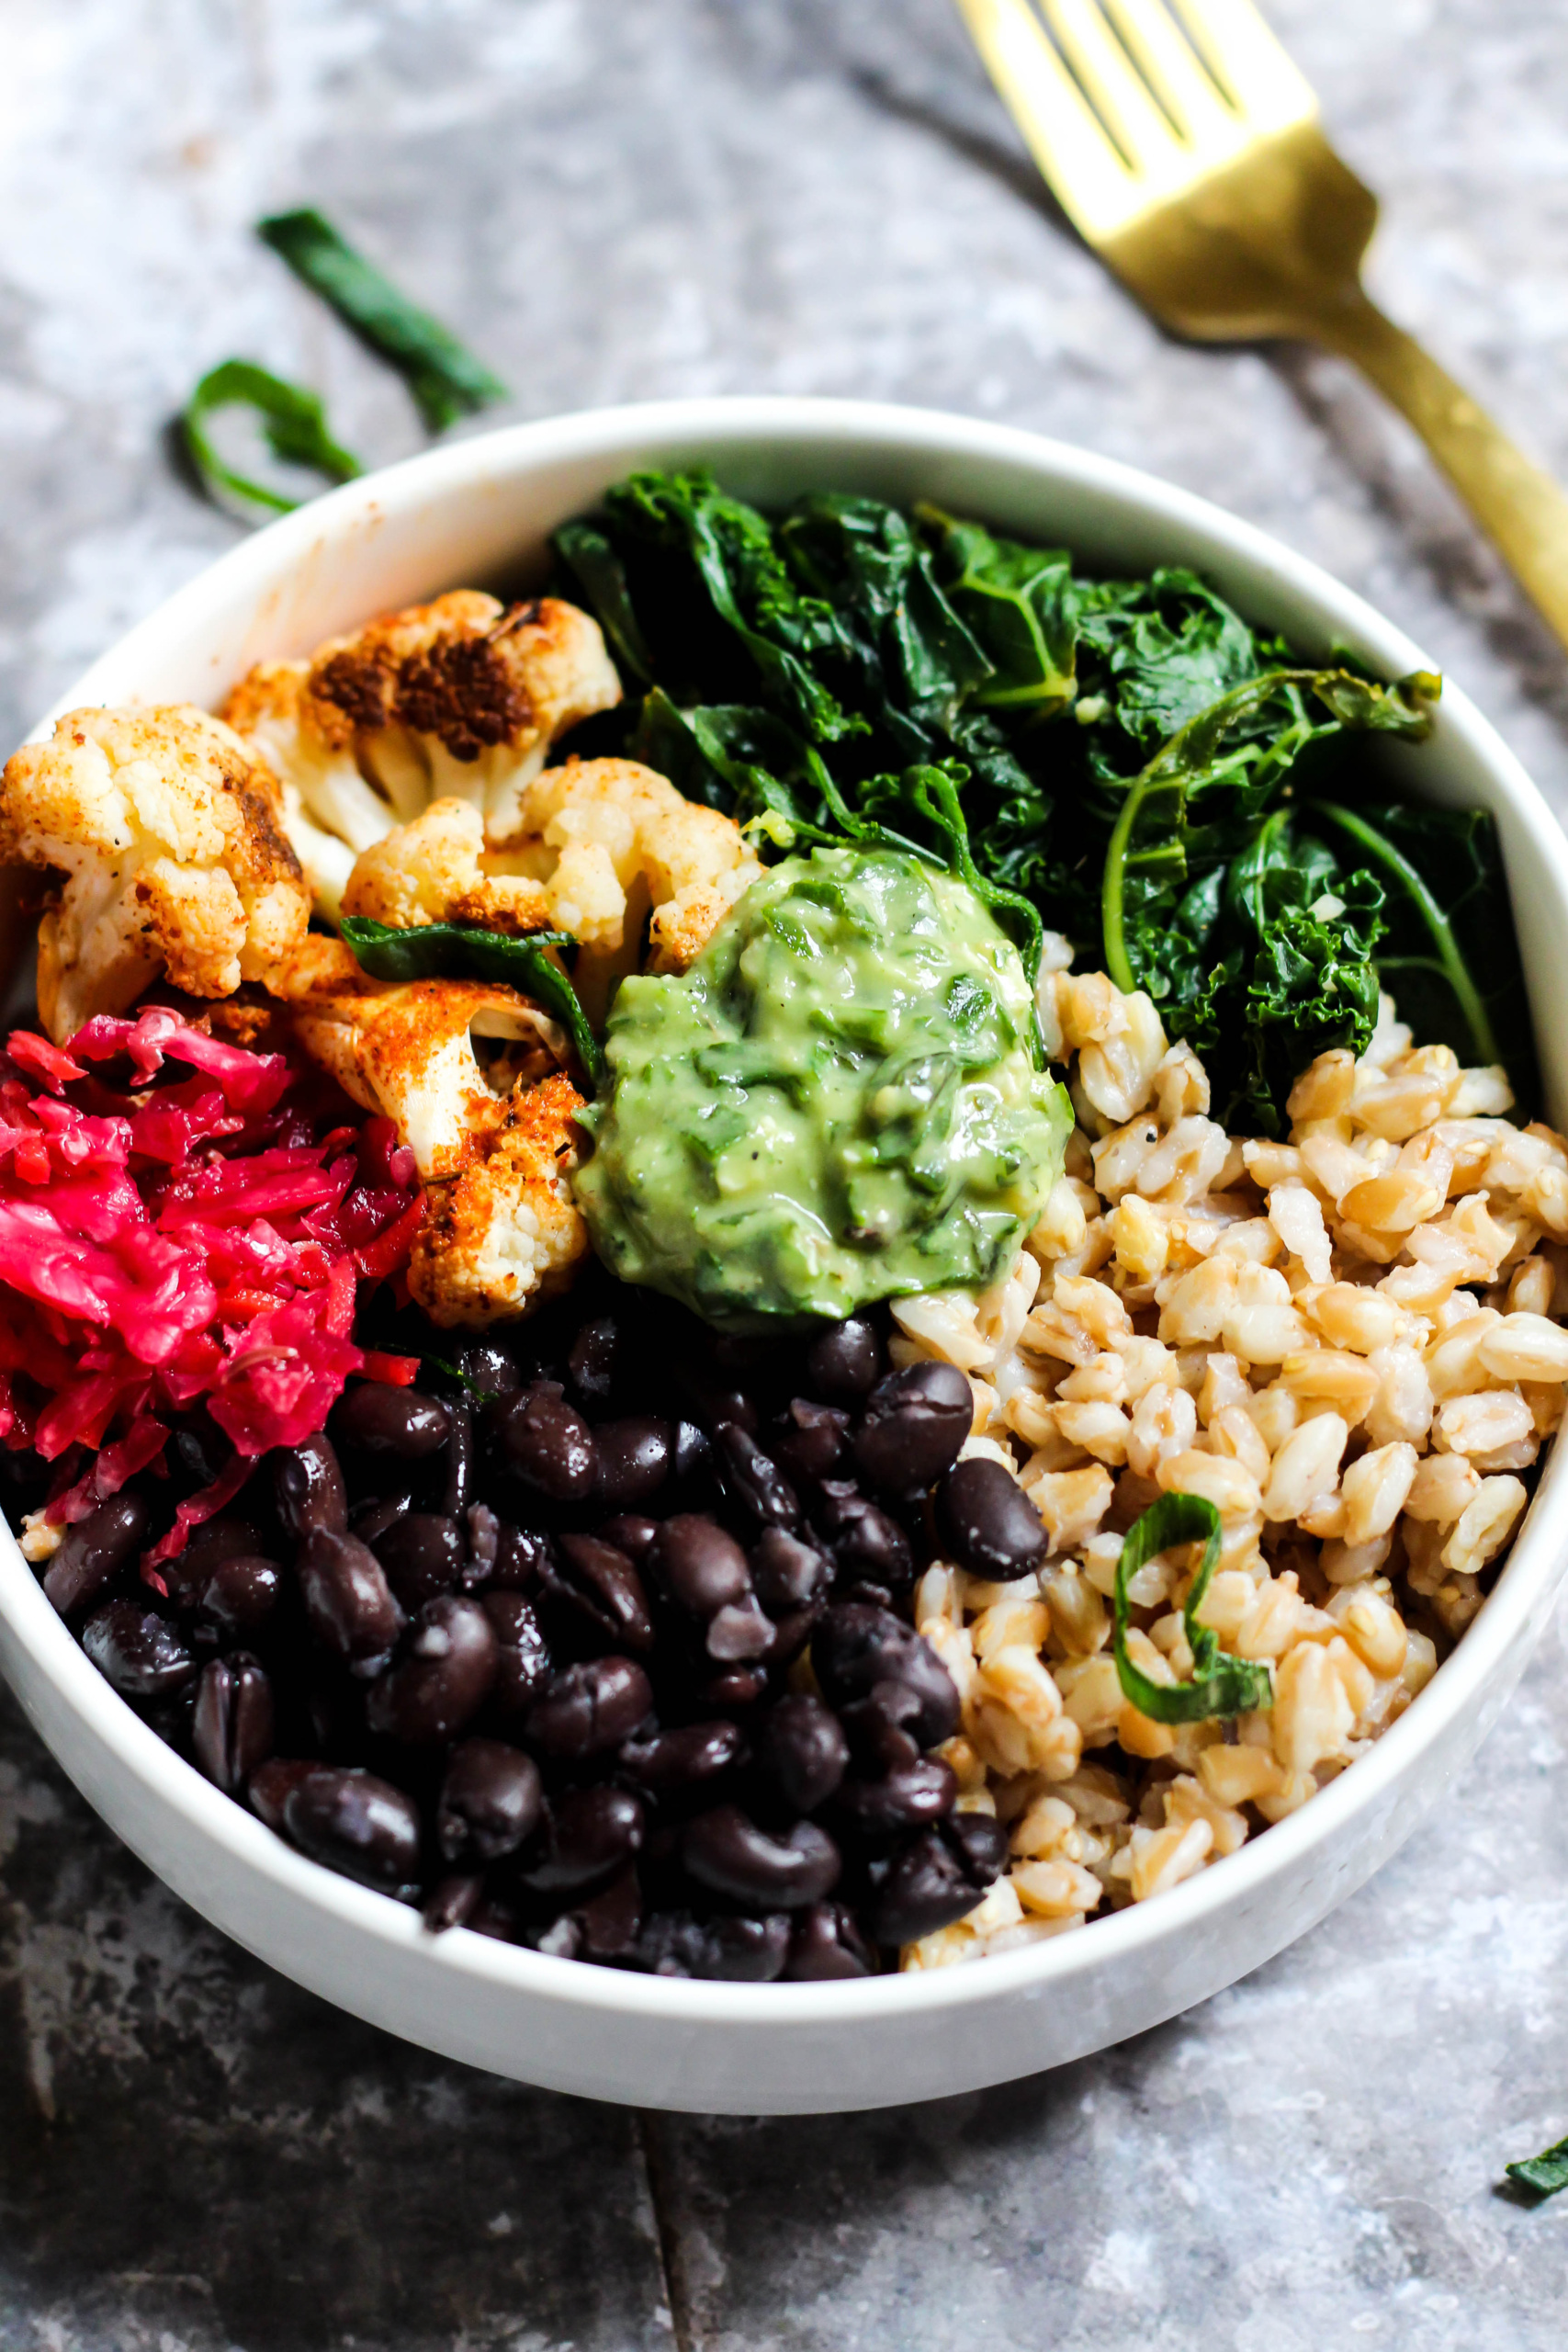 a power bowl filled with grains, greens, vegetables and black beans